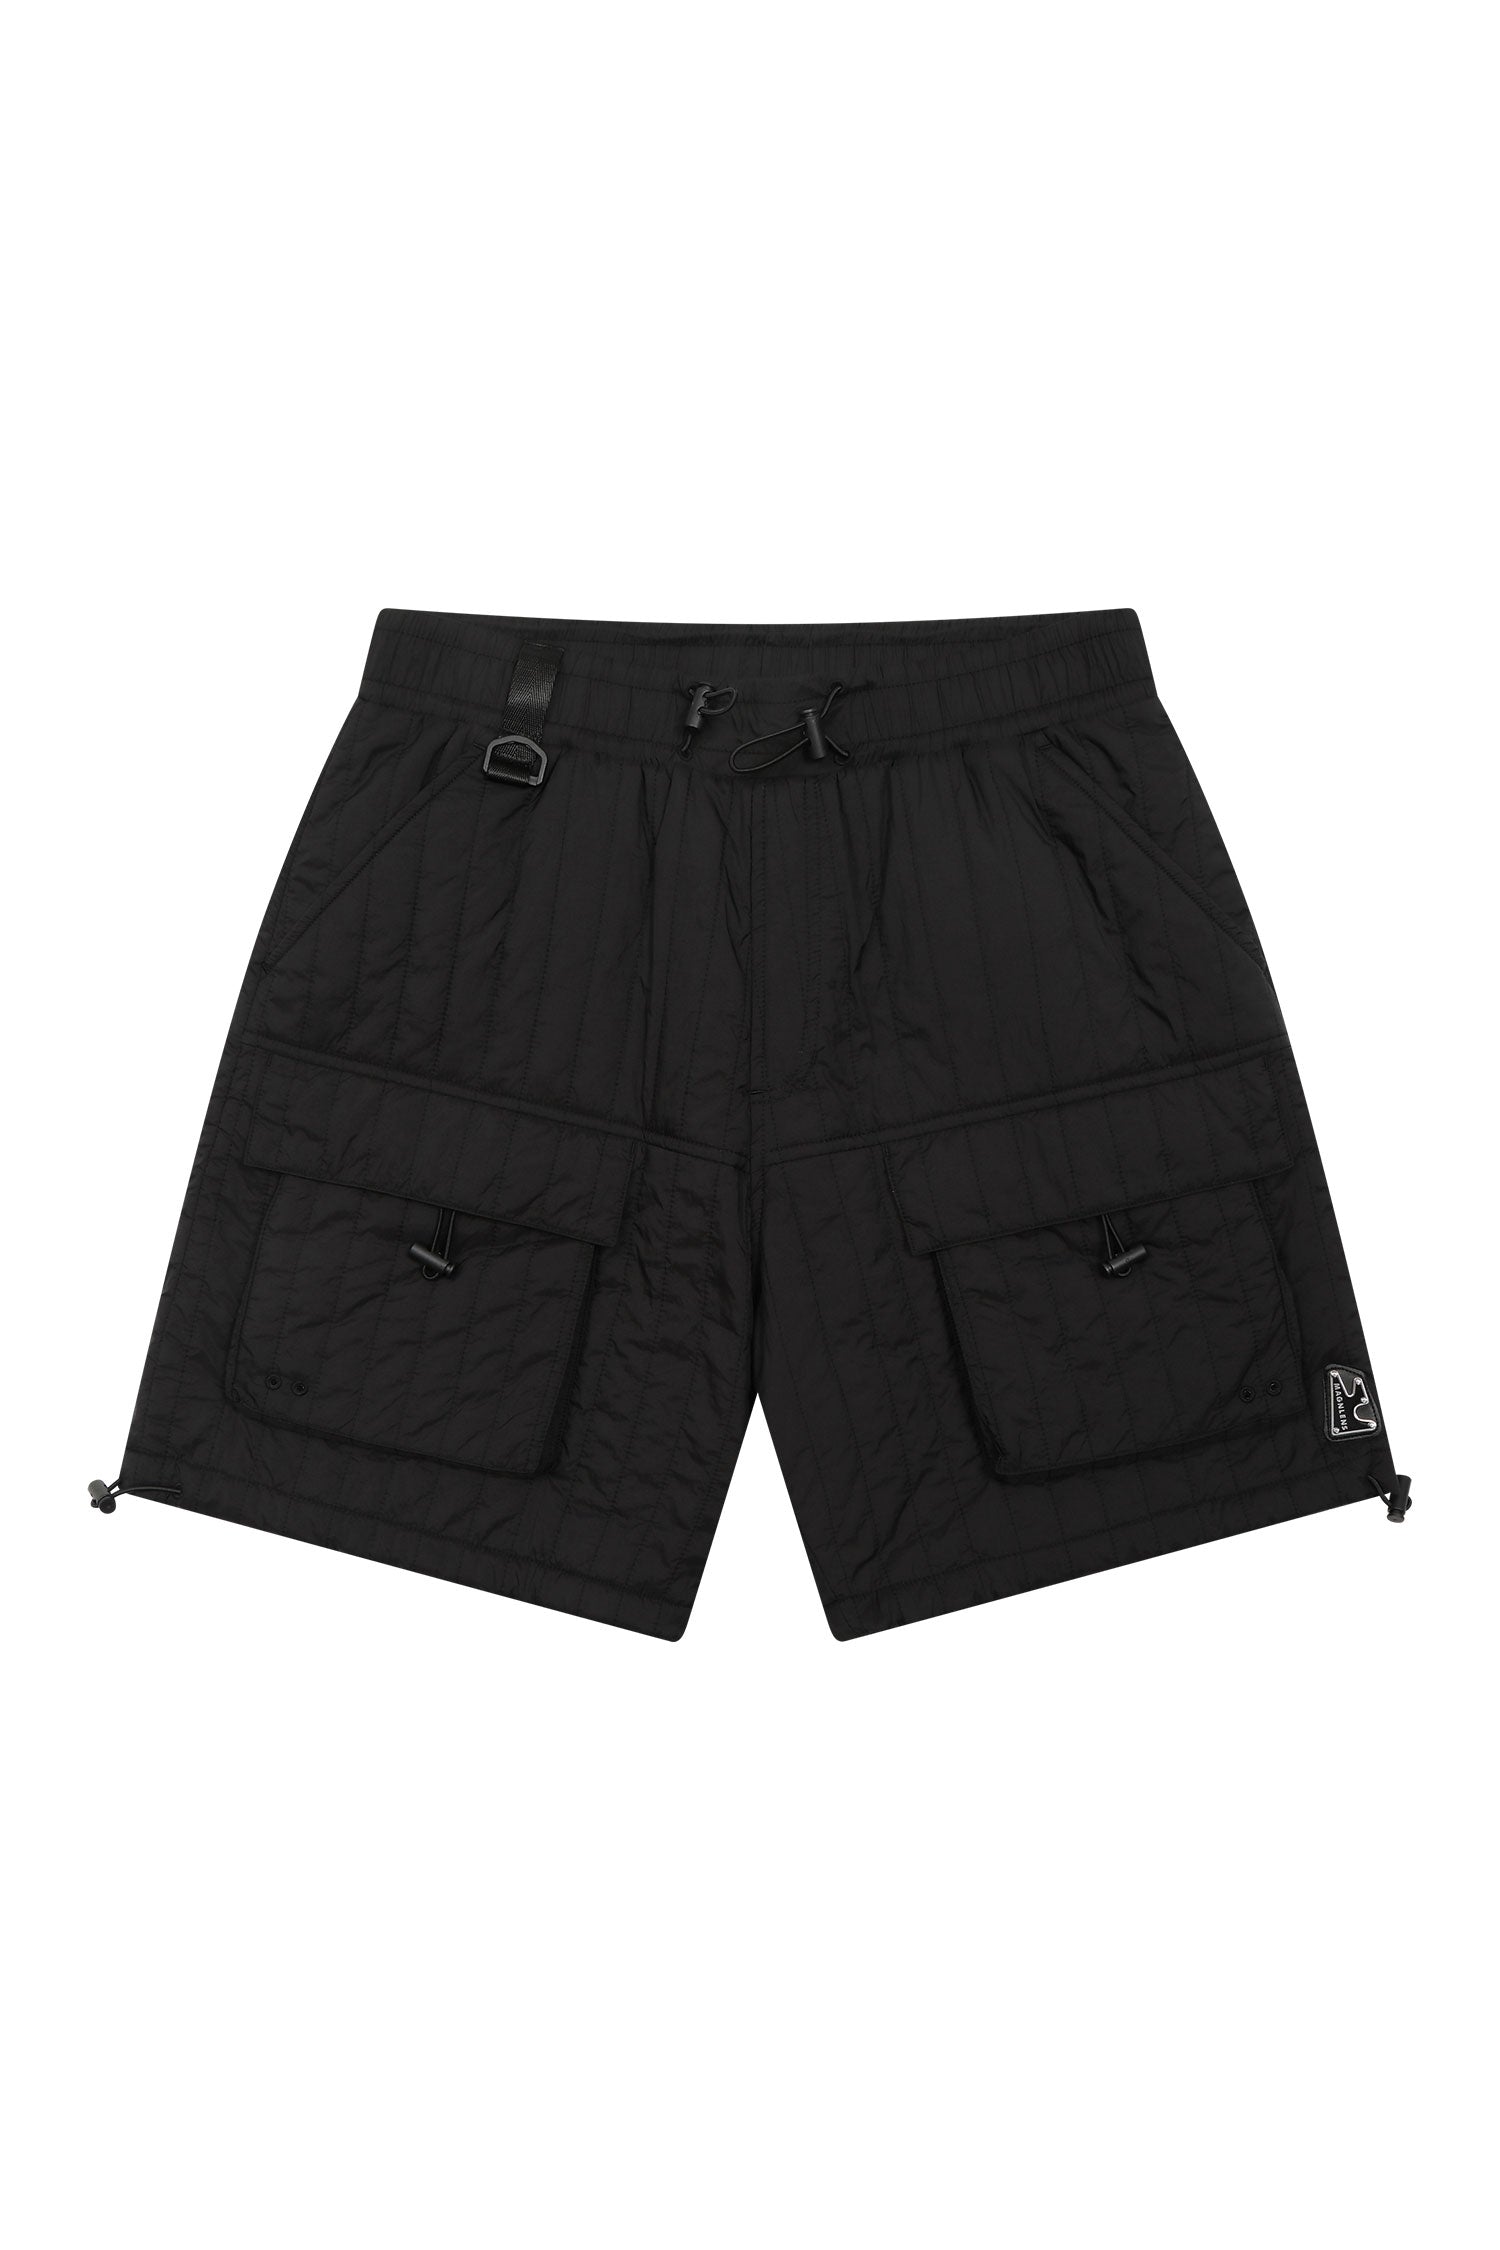 Norco Quilted Cargo Shorts